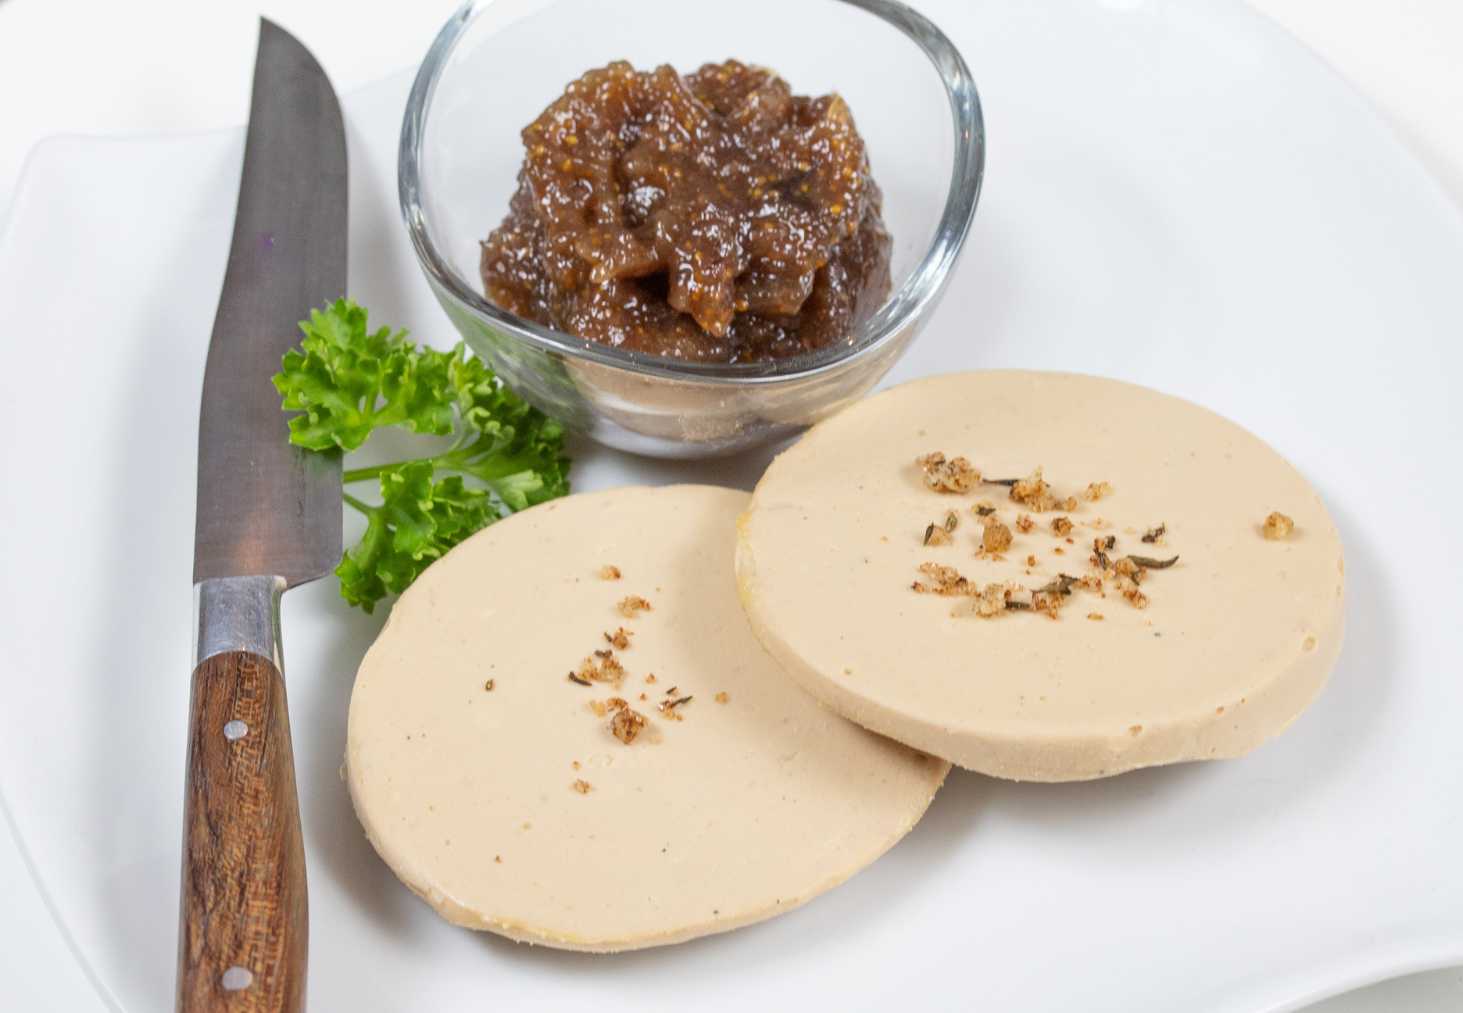 What is French Foie Gras & Why is it Controversial?